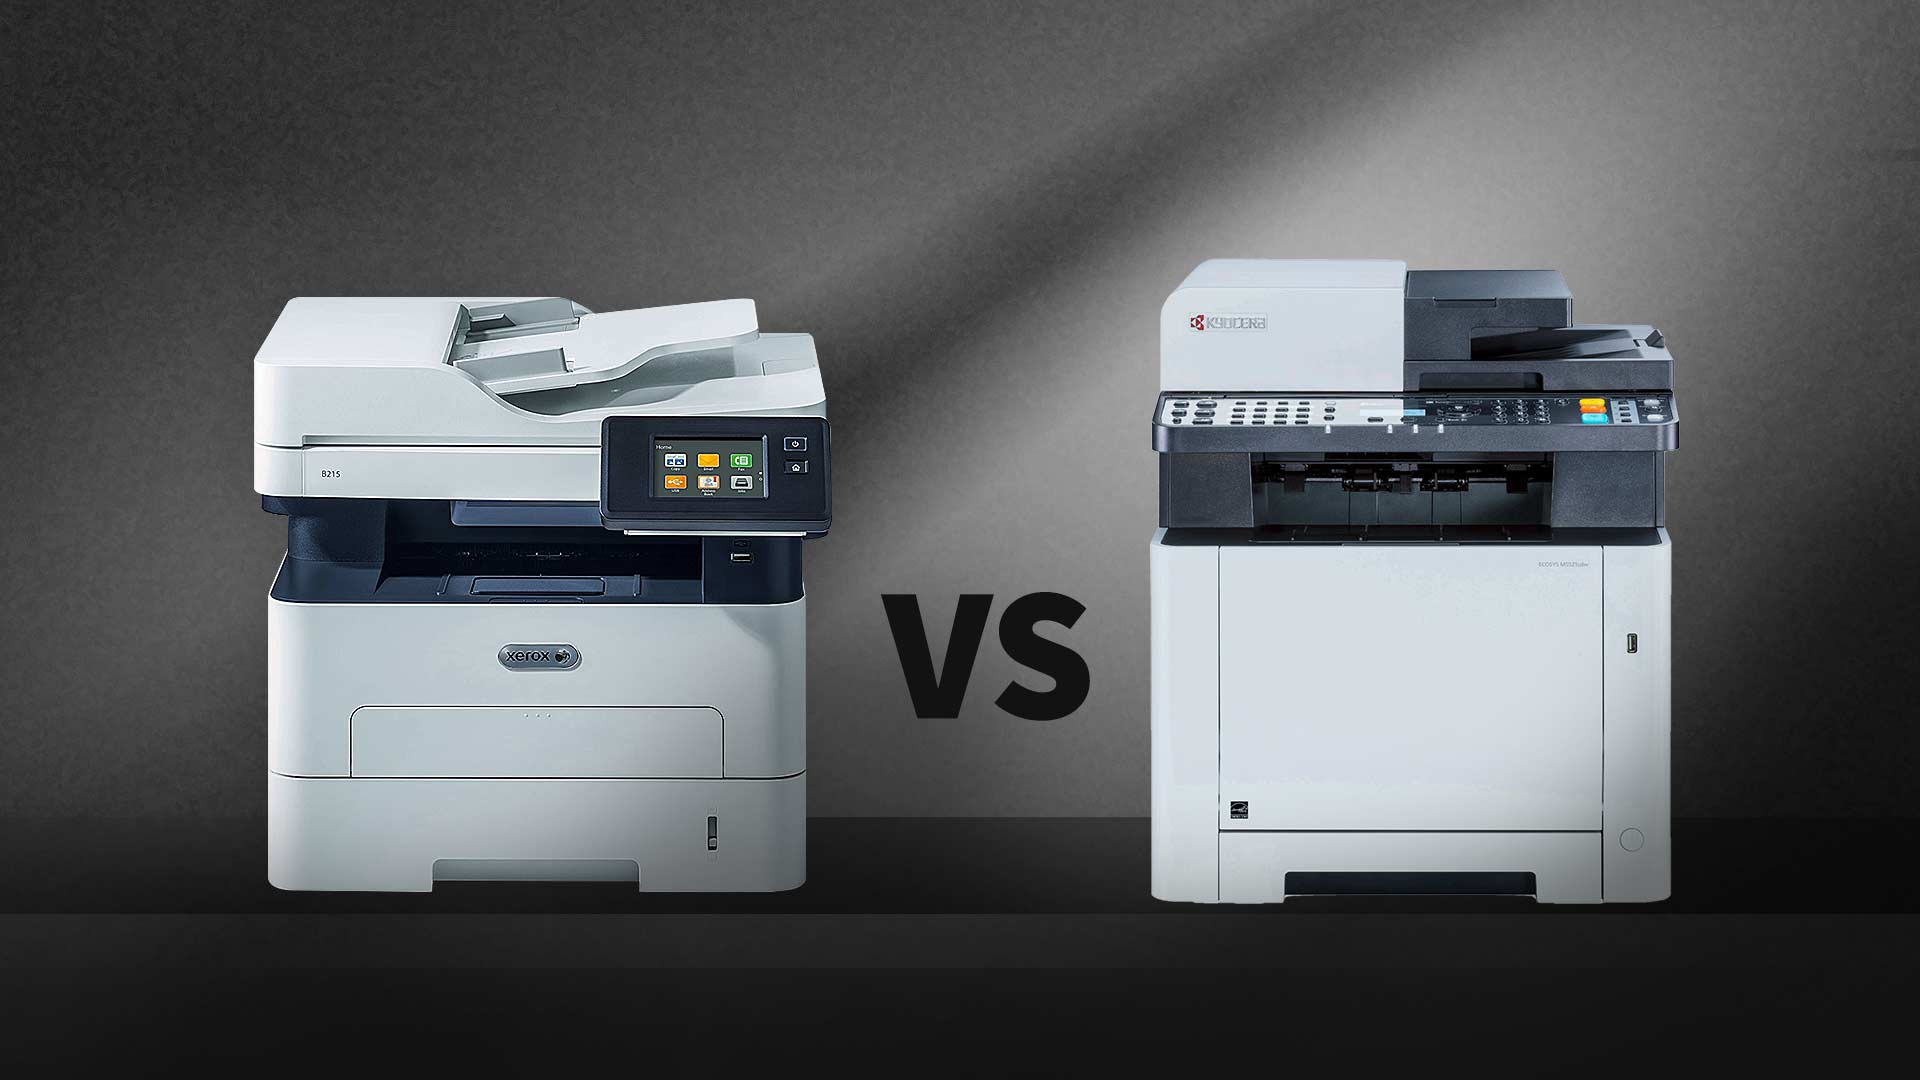 A3 vs. Printer: What's The Difference?